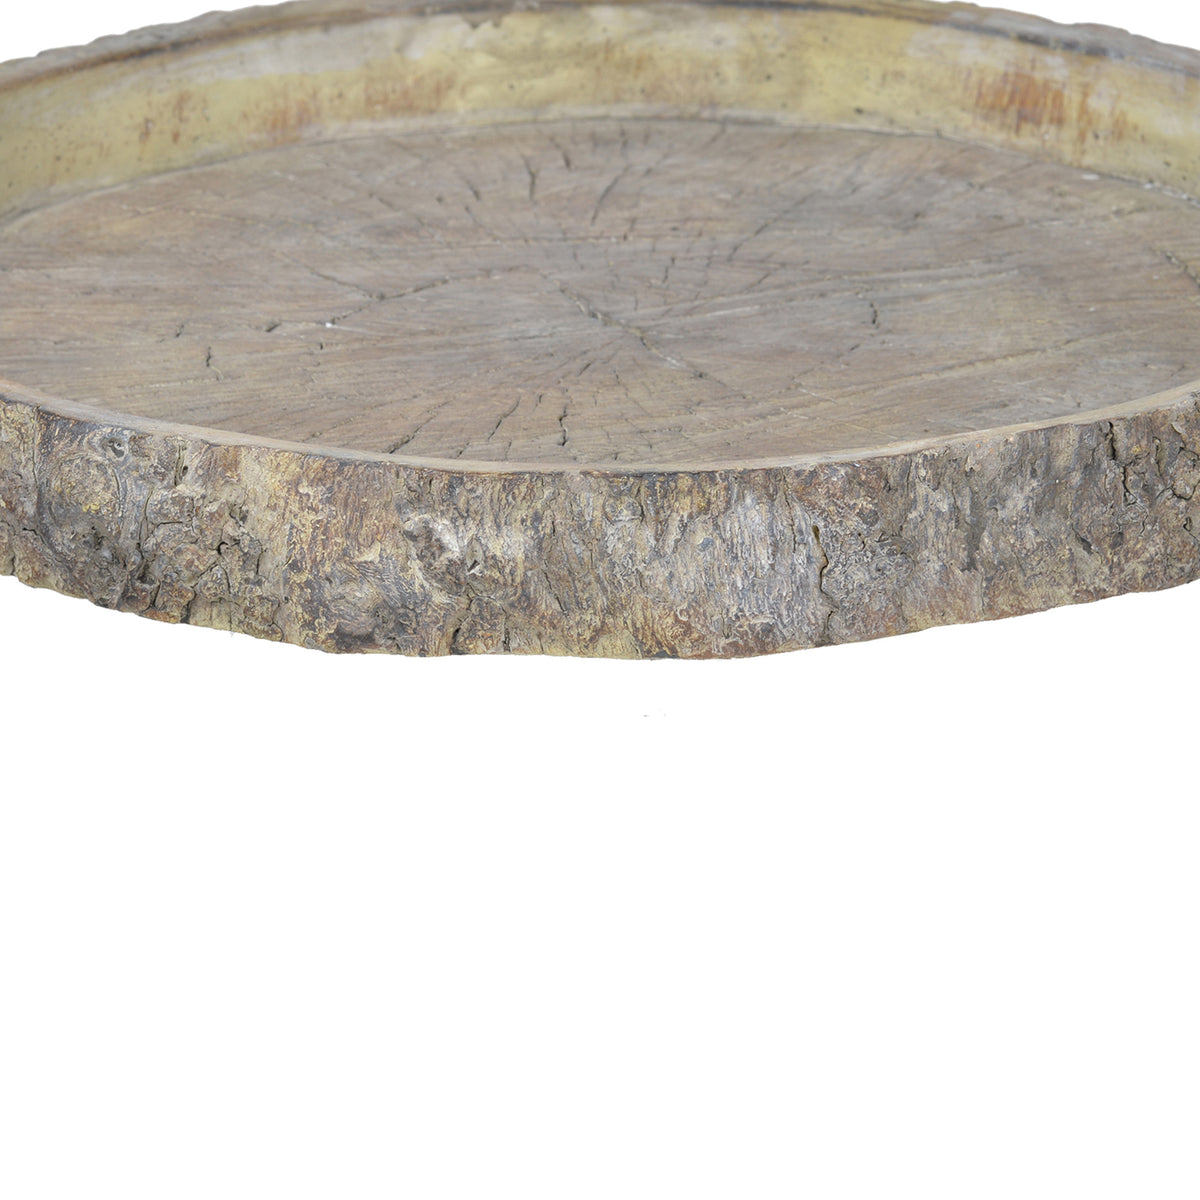 Round Shape Cemented Log Plate with Distressed Details, Gray - BM200902